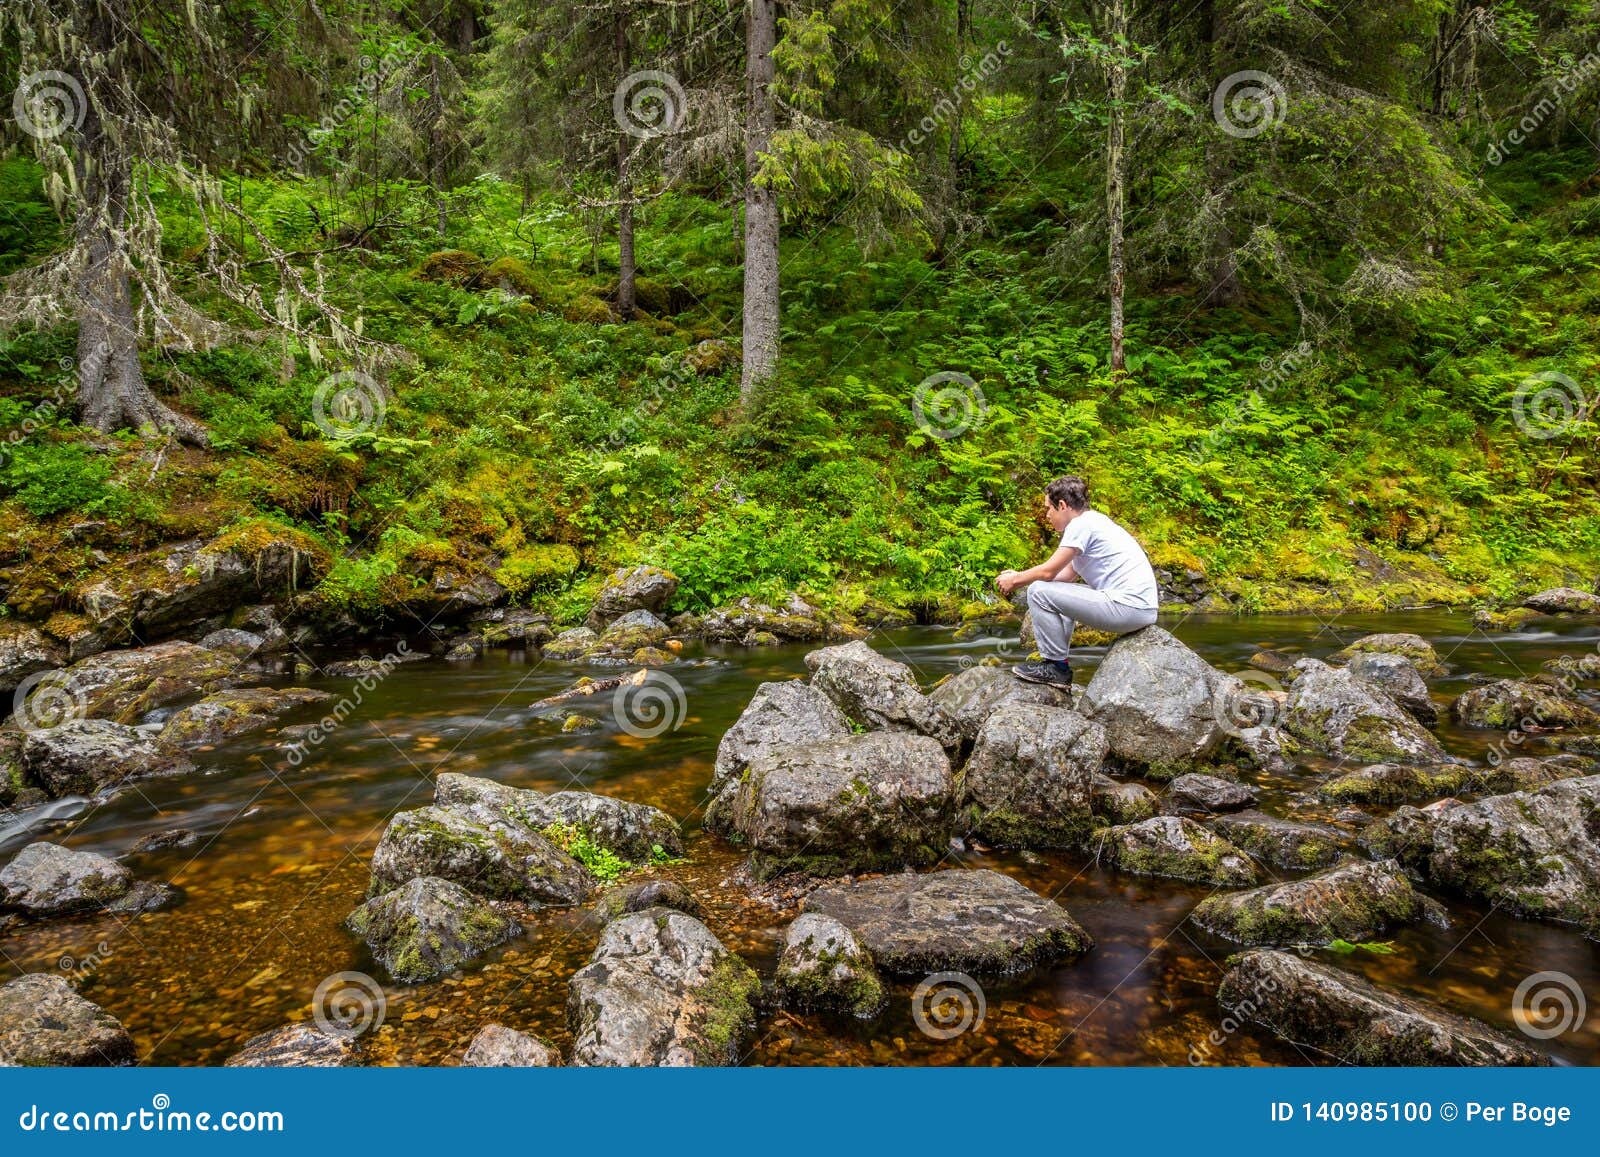 Beautiful And Peaceful Scene Of A Young Male Sitting And Contemplating On Stone Rocks At A Forest Stream Stock Photo Image Of Natural River